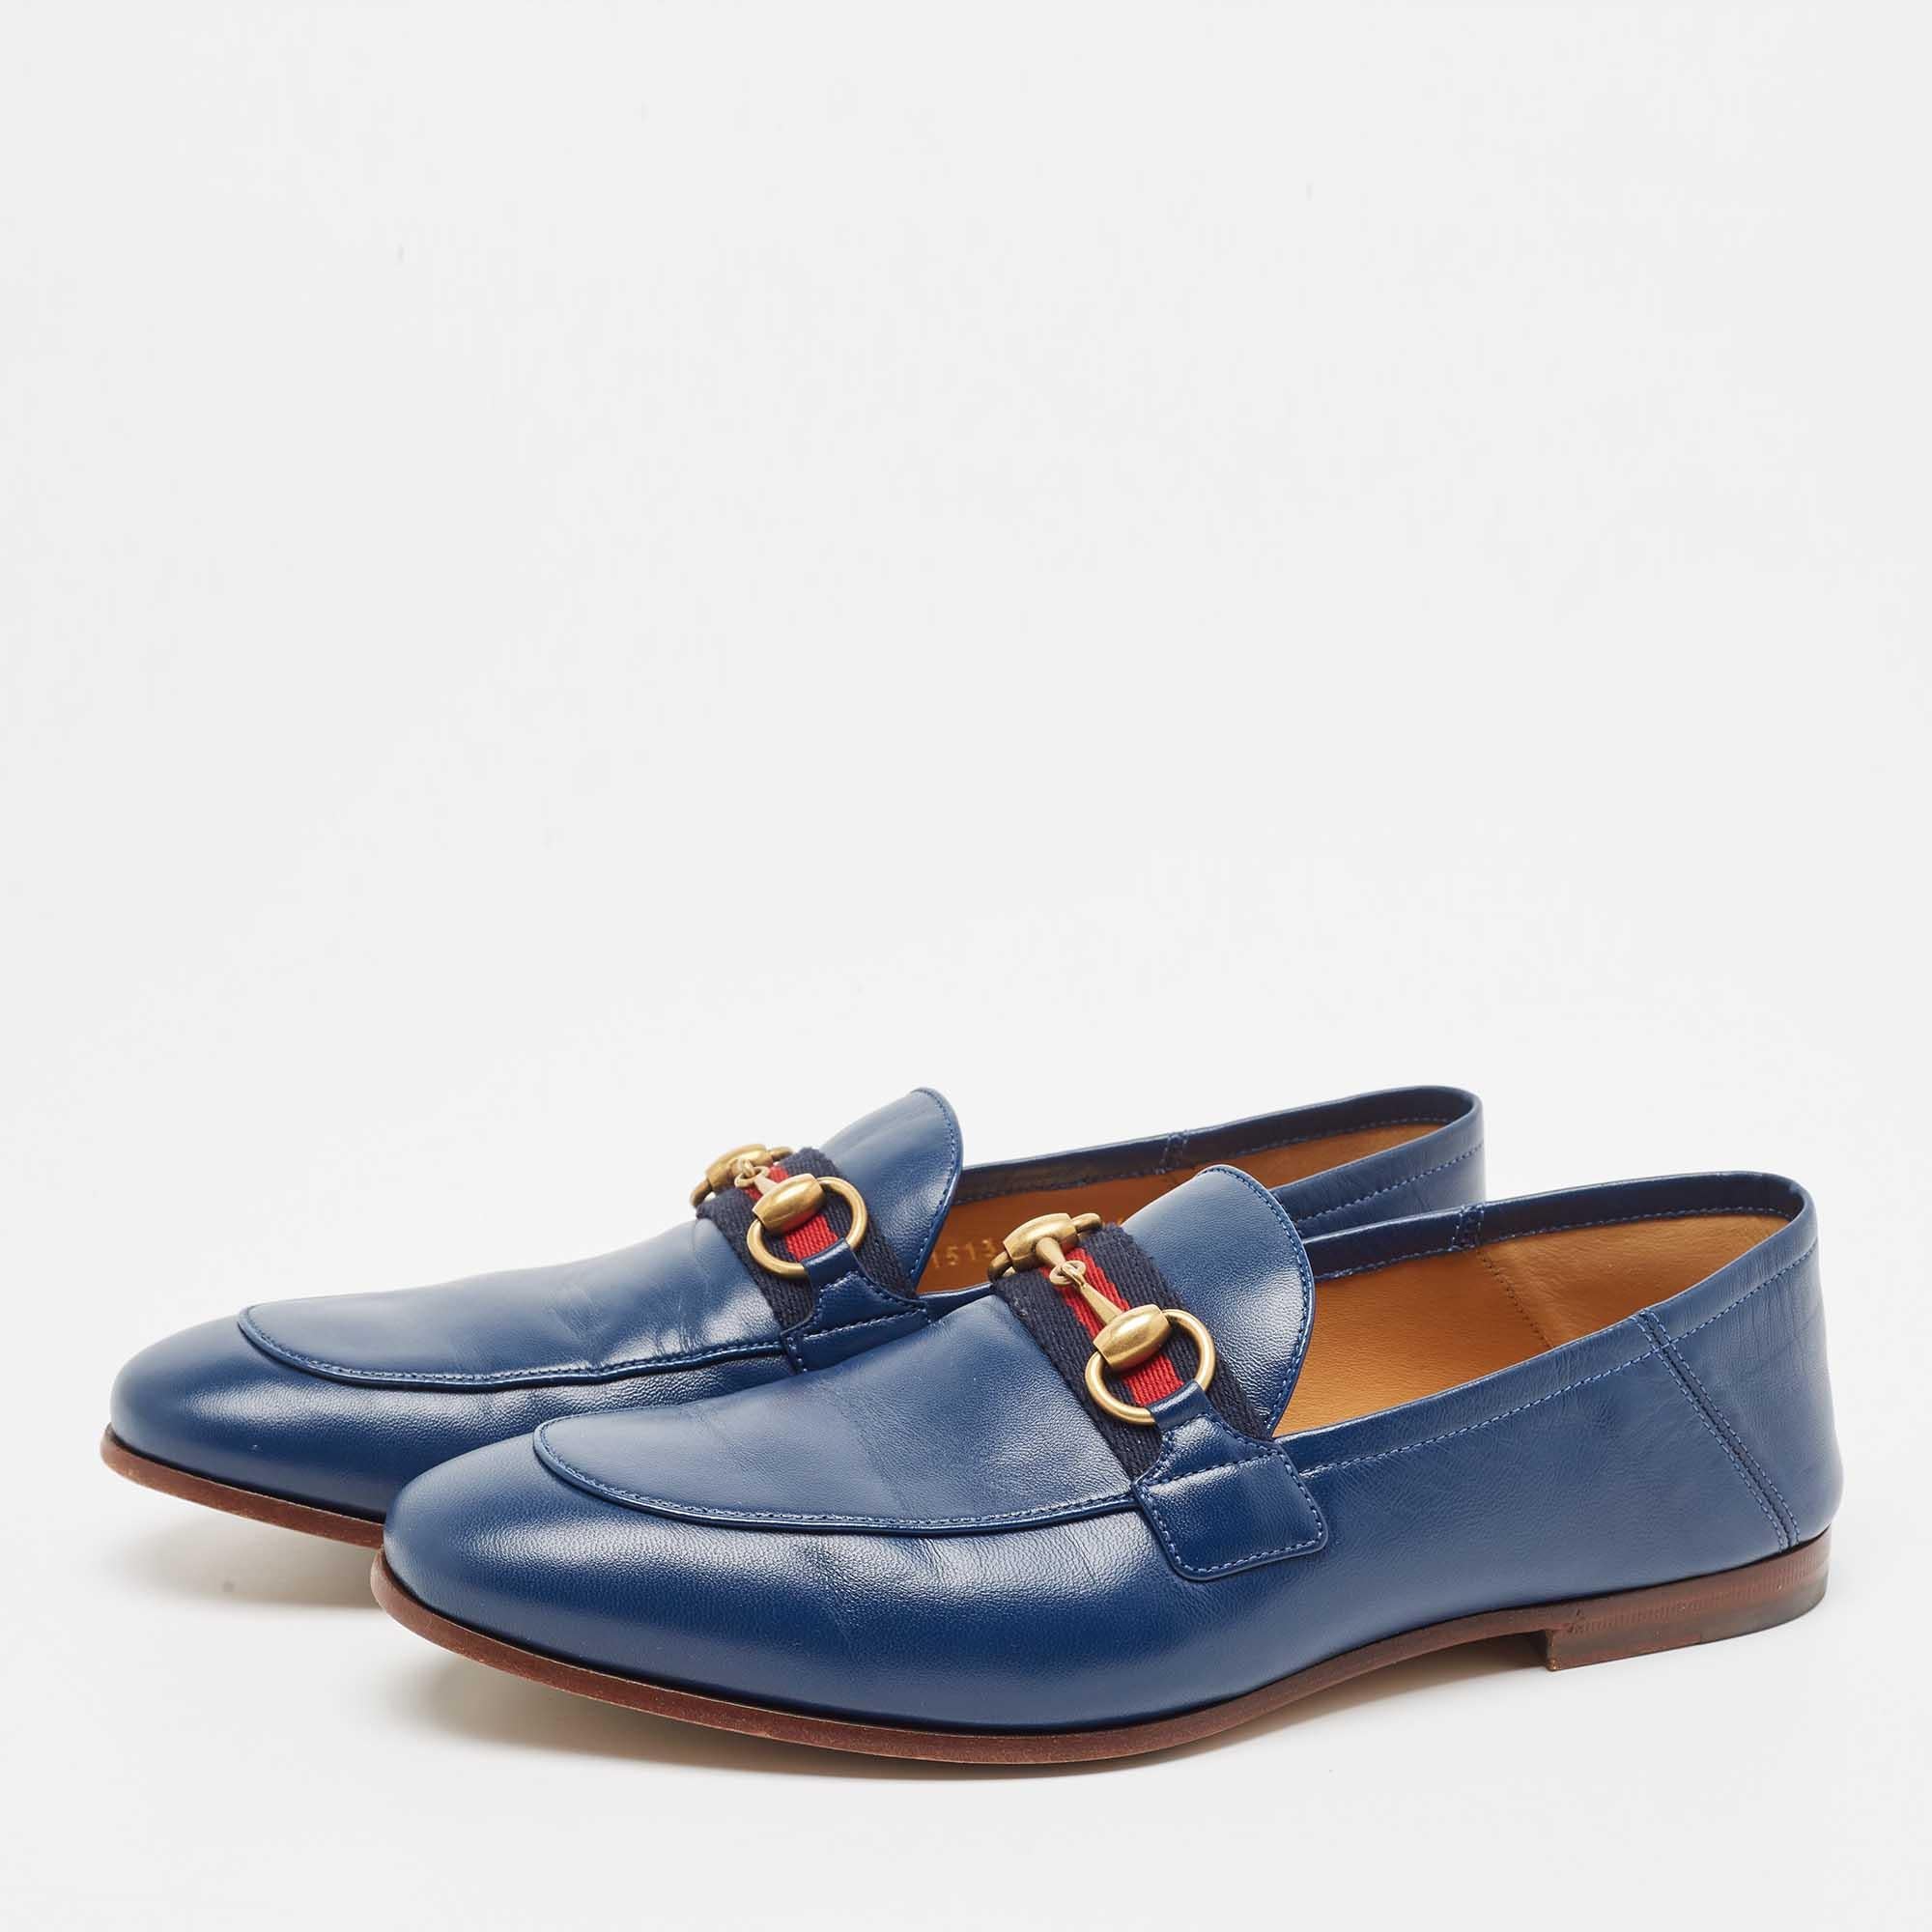 Gucci Blue Leather Web Horsebit Loafers Size 40 5